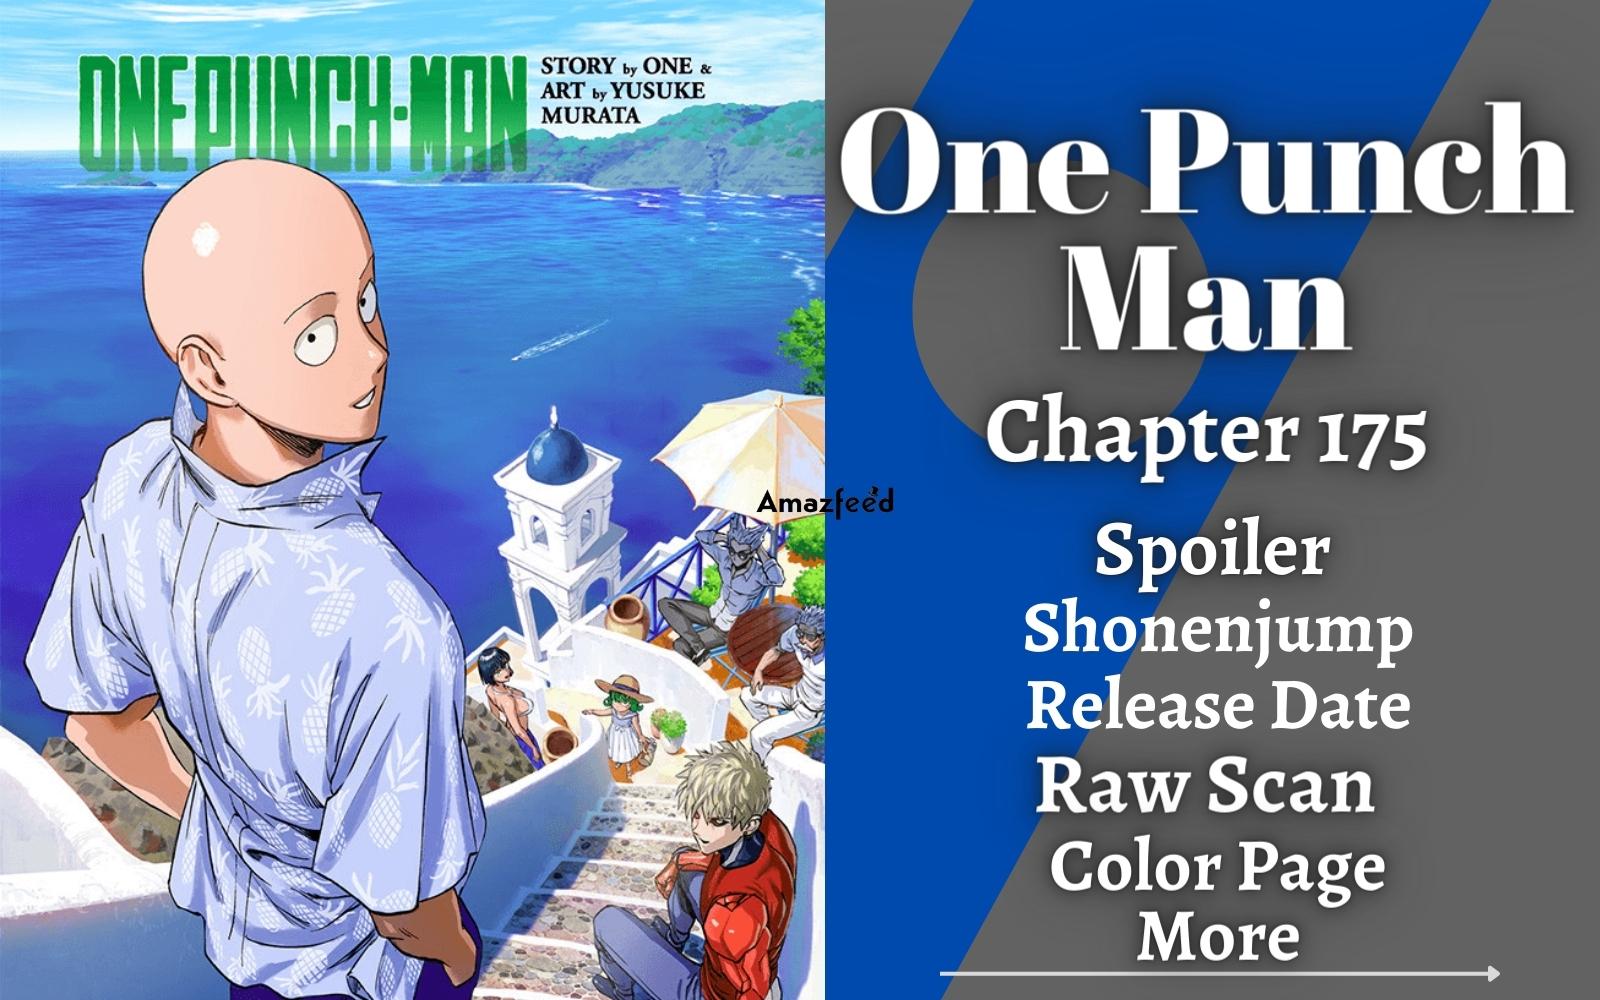 One Punch Man Chapter 175 Spoiler, Shonenjump Release Date, Raw Scan, Color Page